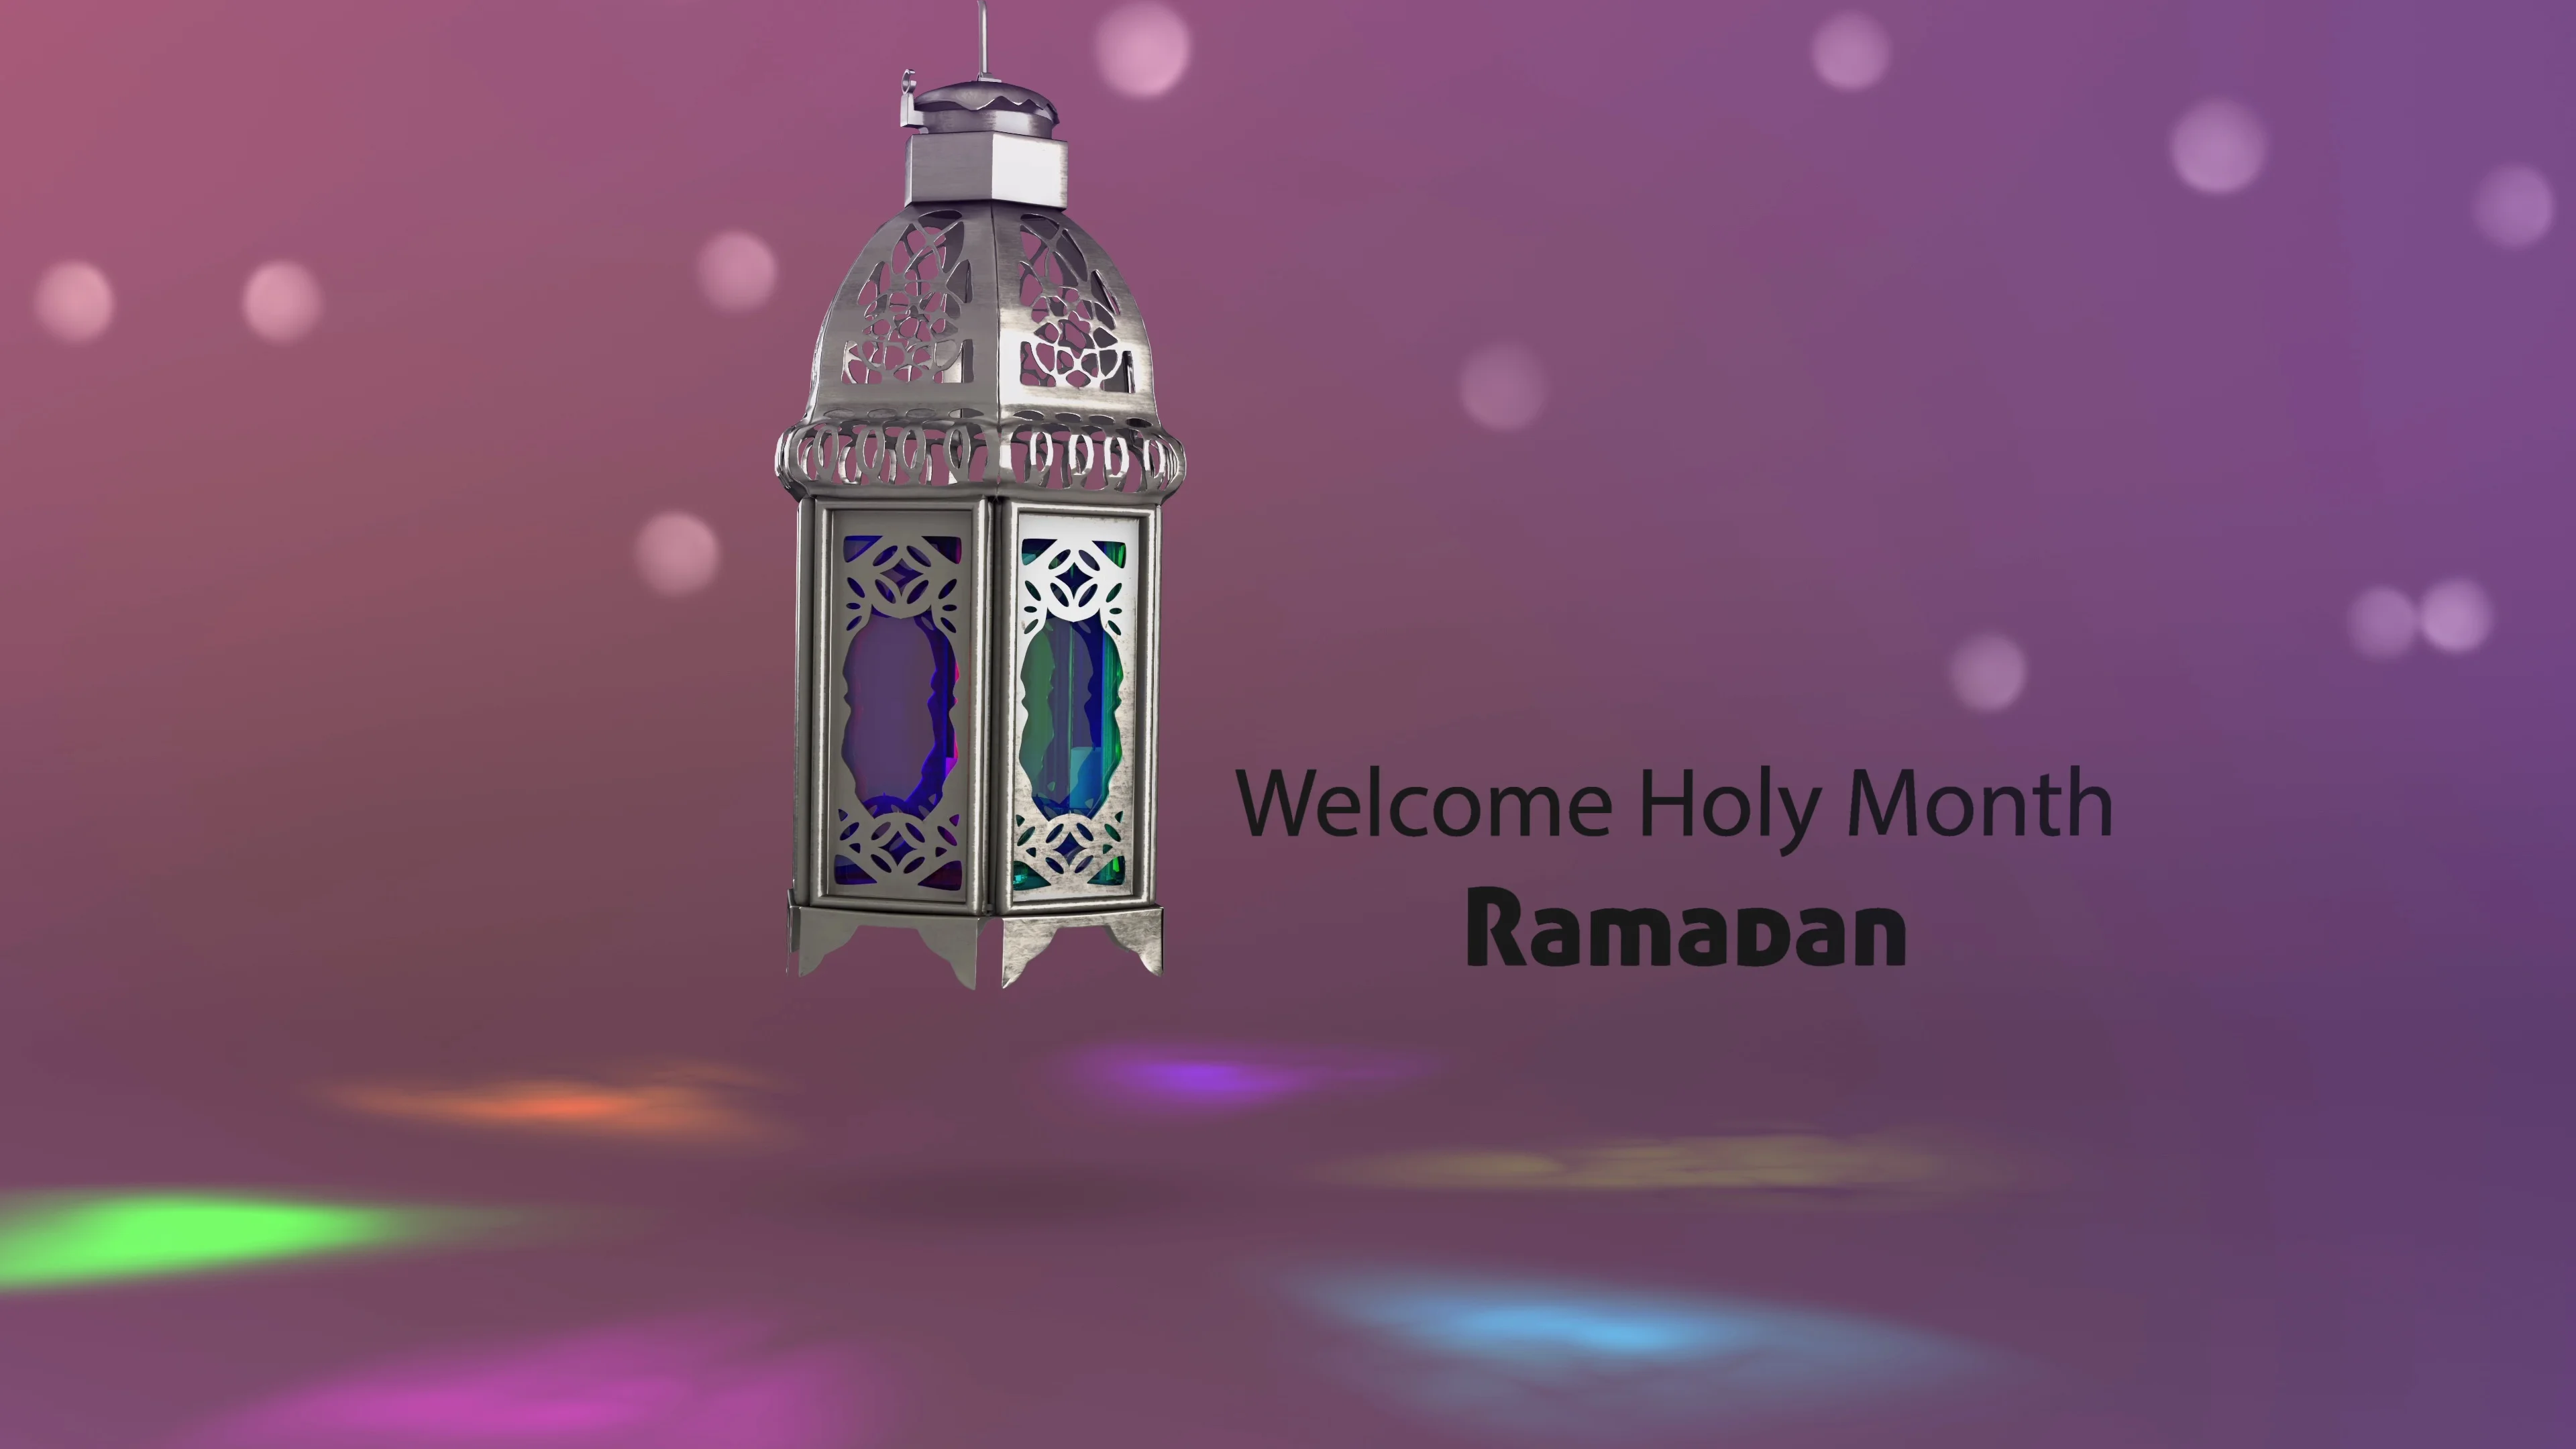 Welcome holy month ramadan animation | Stock Video | Pond5